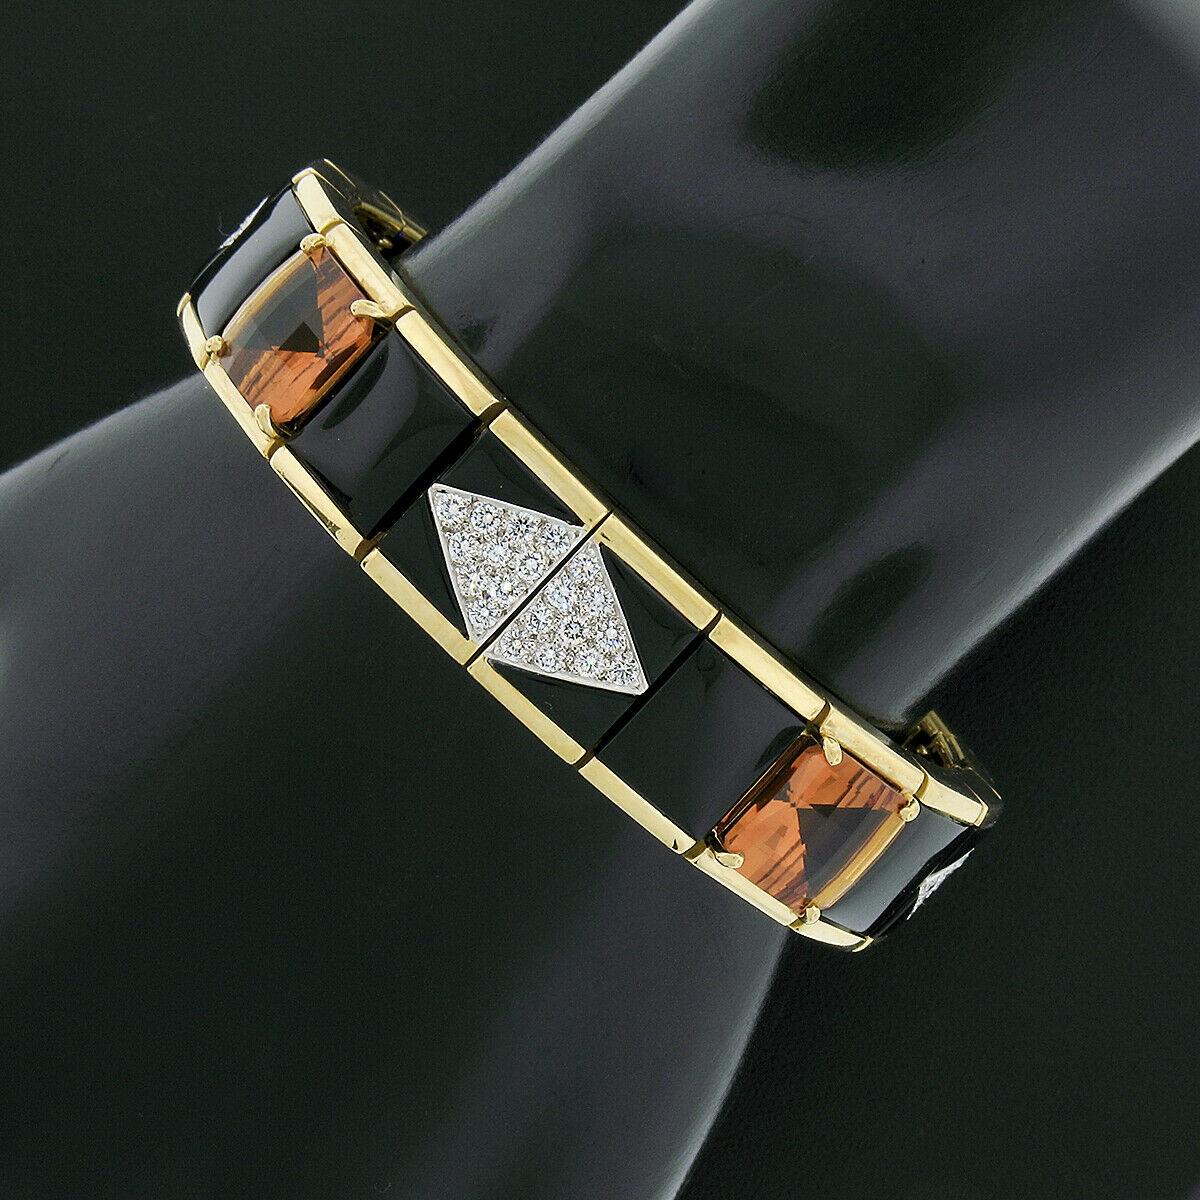 This magnificent statement bracelet was designed by Michael Bondanza and crafted from solid 18k yellow gold and platinum. It features wide rectangular links with a nice polished finish in which are neatly set with fine black onyx, citrine, and